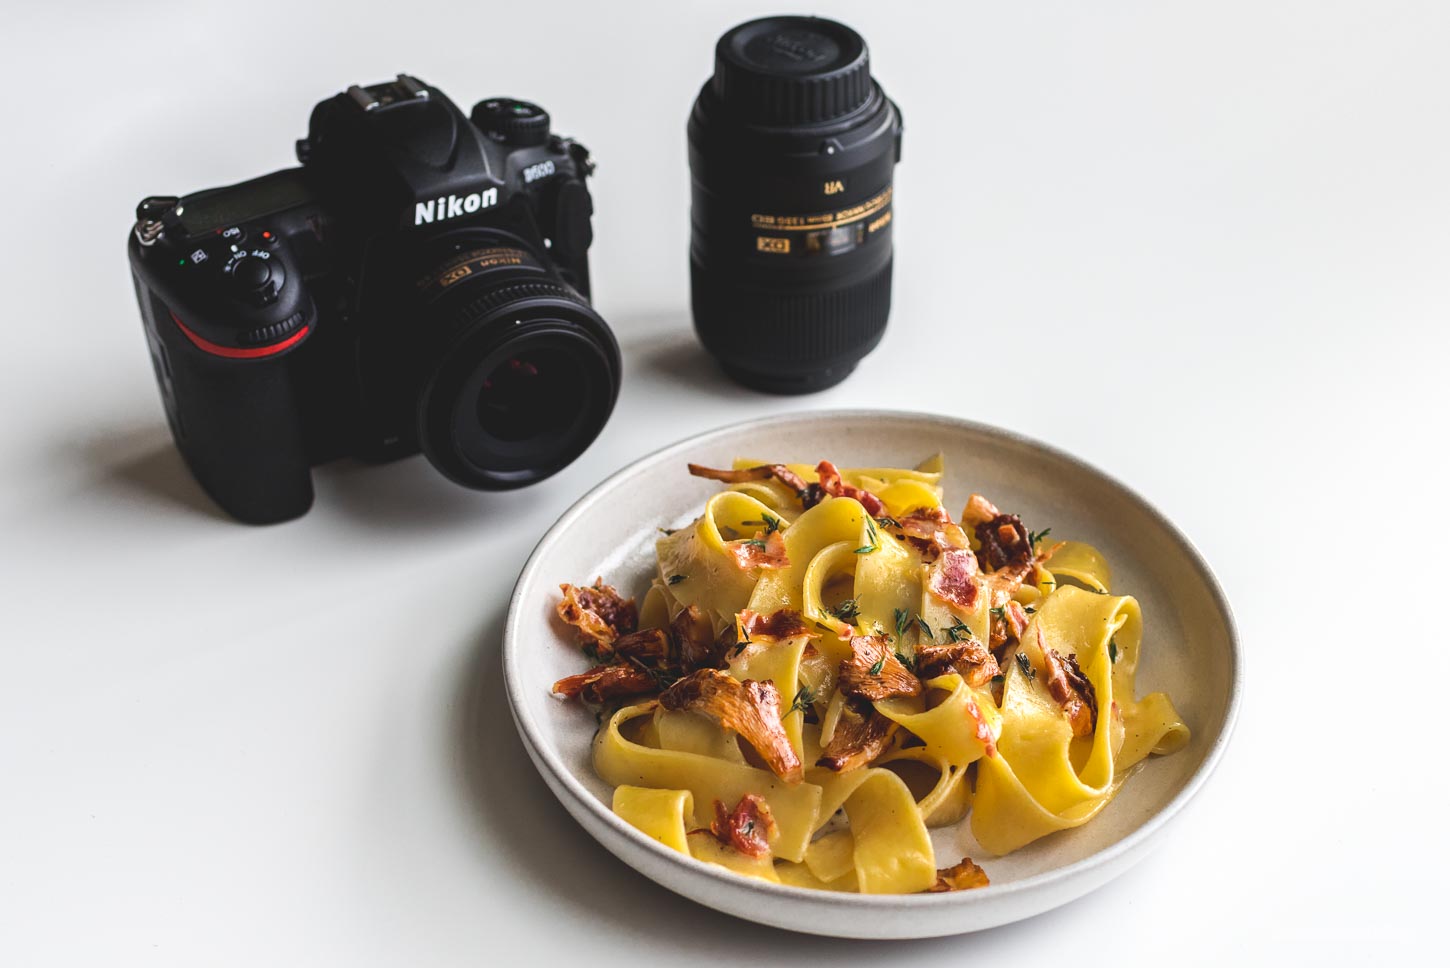 beginner's guide to food photography | www.iamafoodblog.com